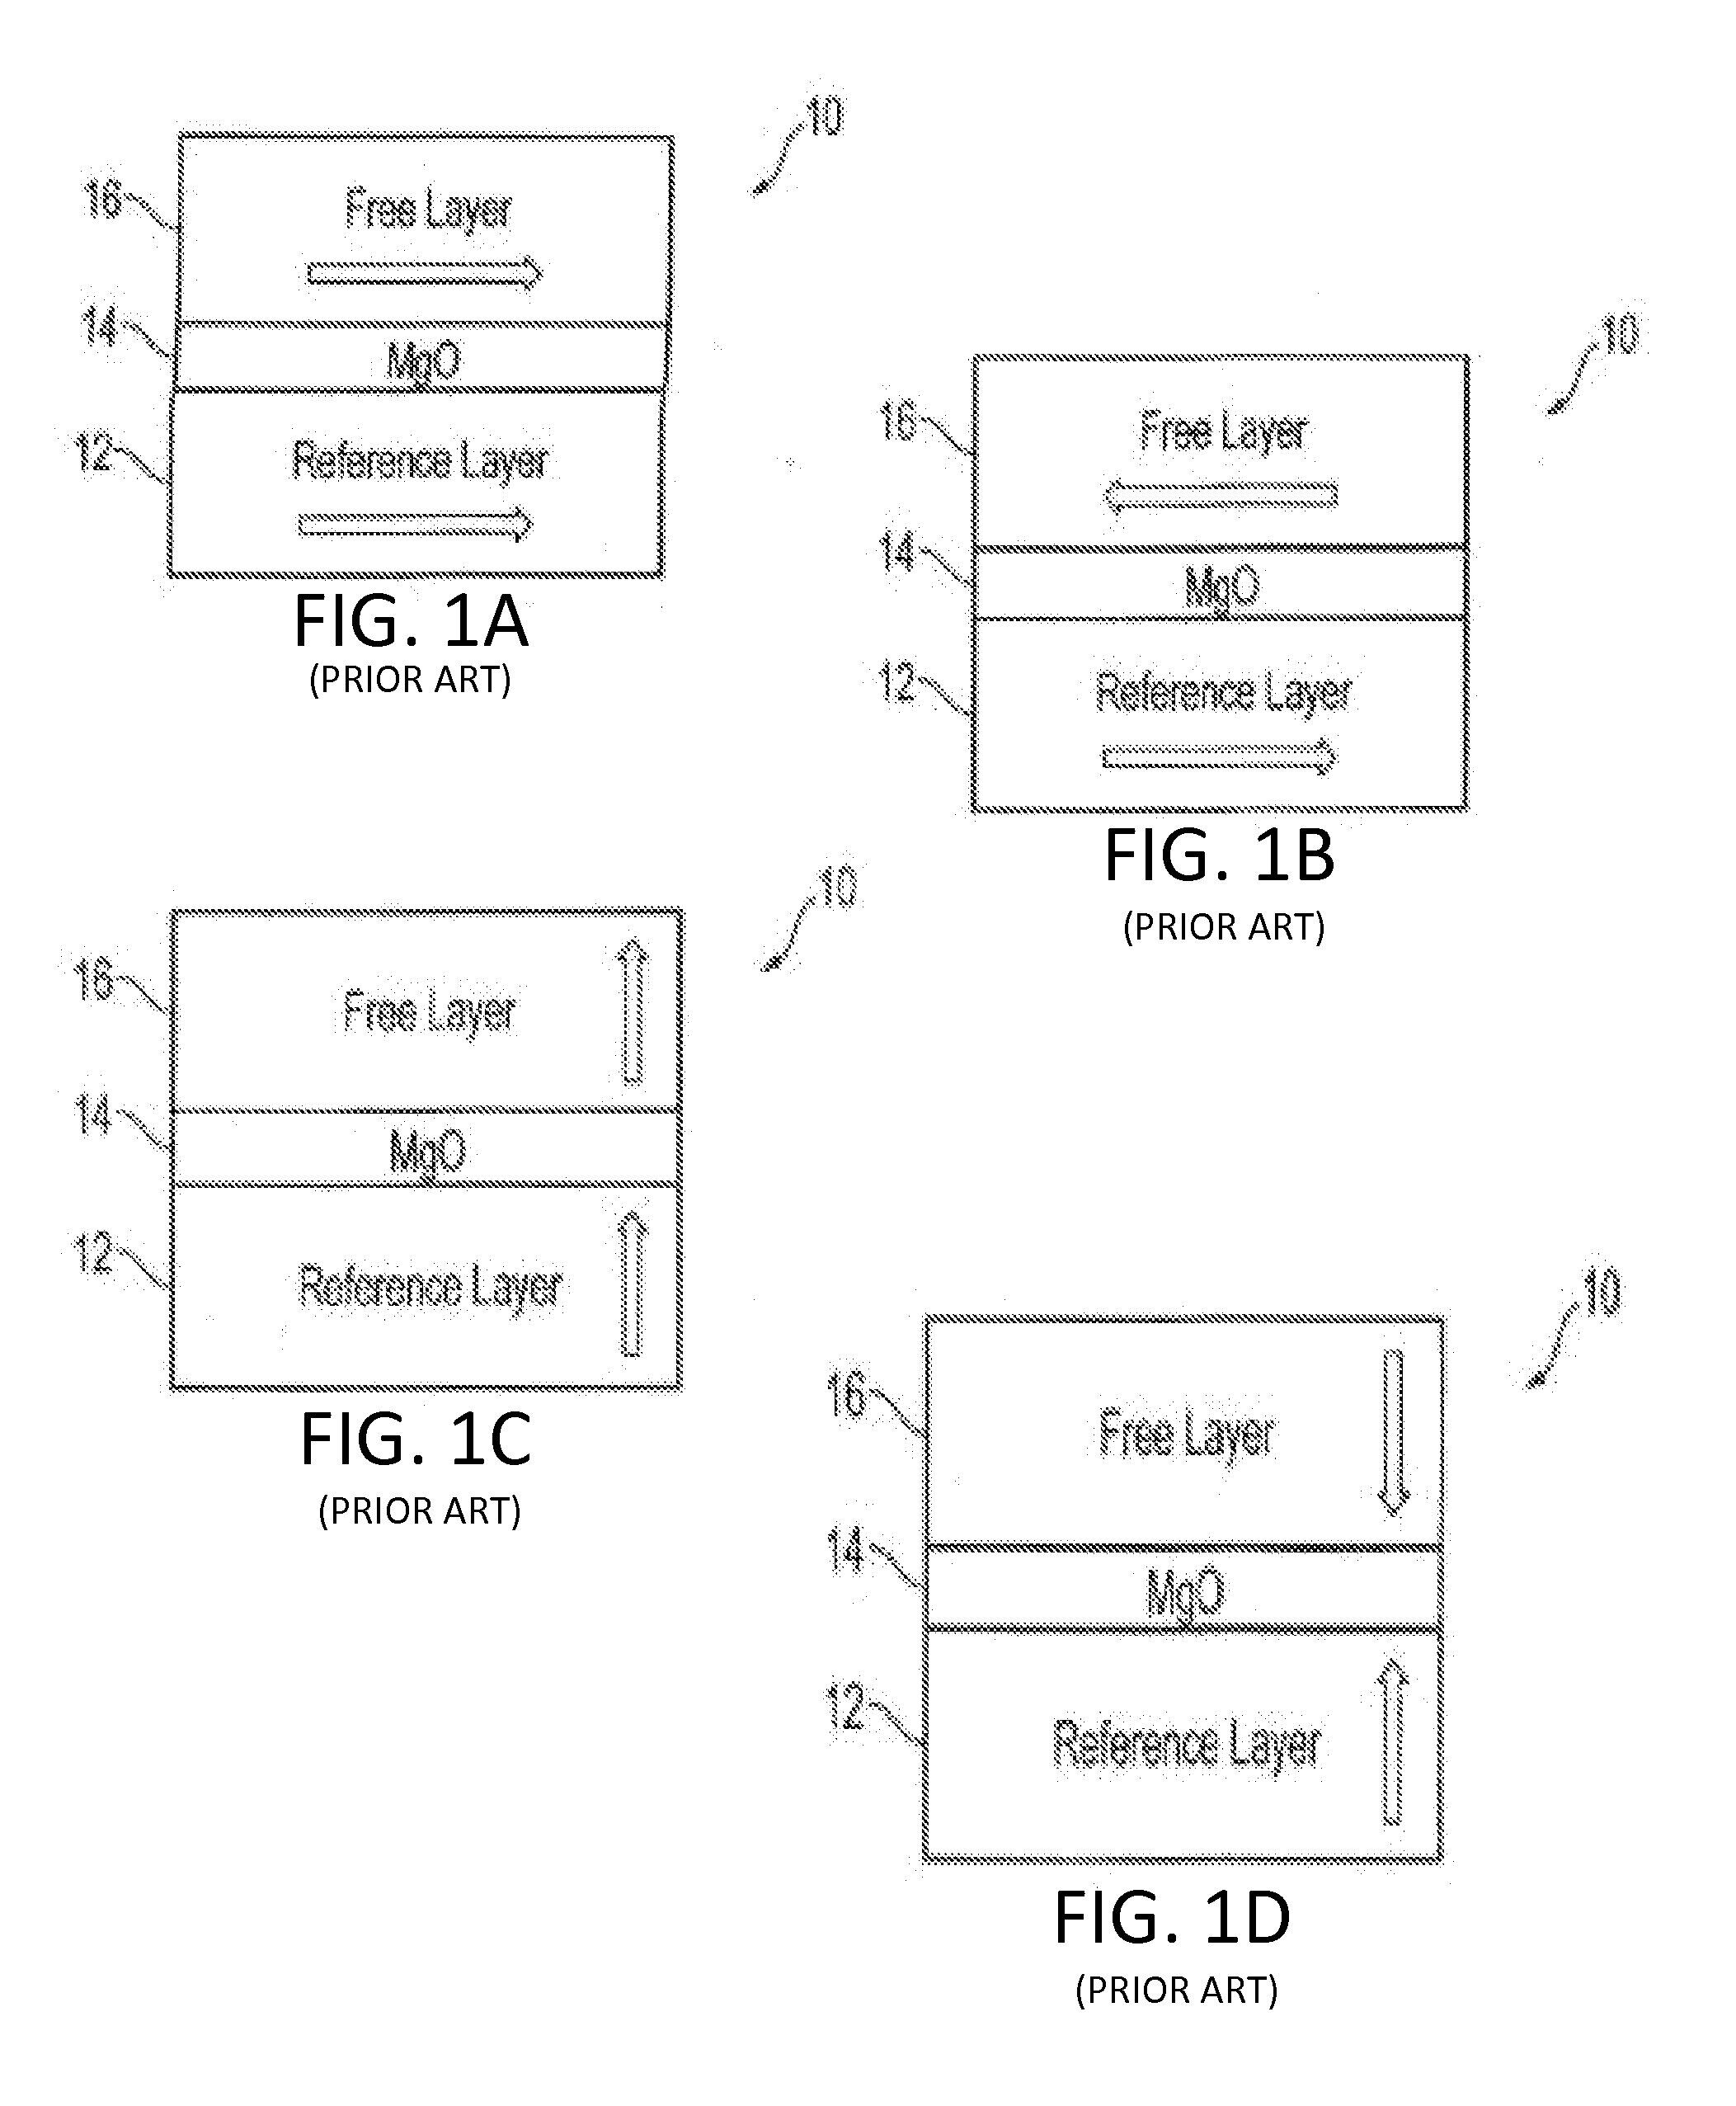 Architecture and method for remote memory system diagnostic and optimization